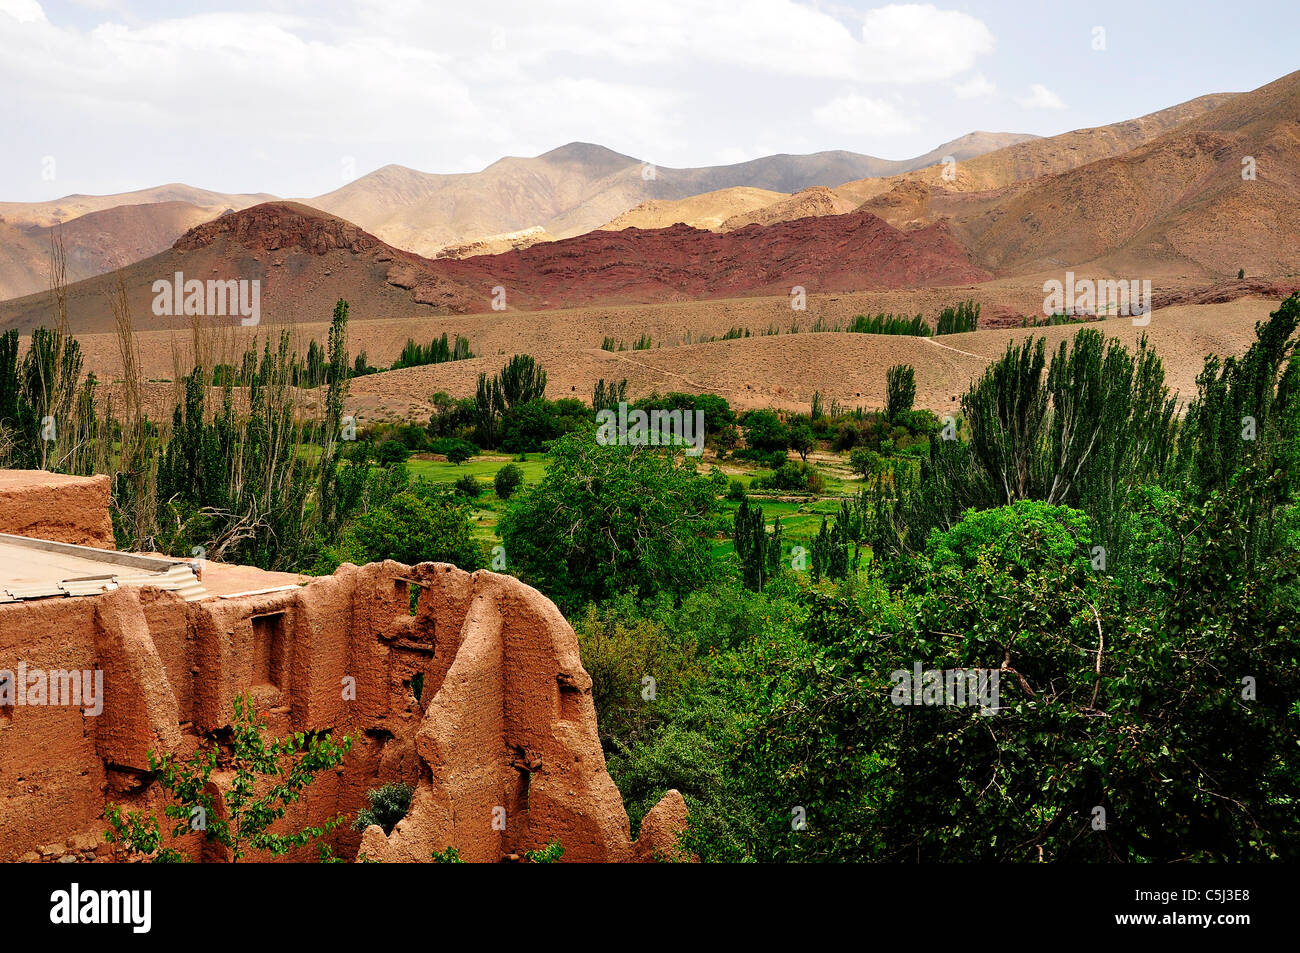 The ruin of an abandoned adobe building and mountain landscape in Iran. Stock Photo